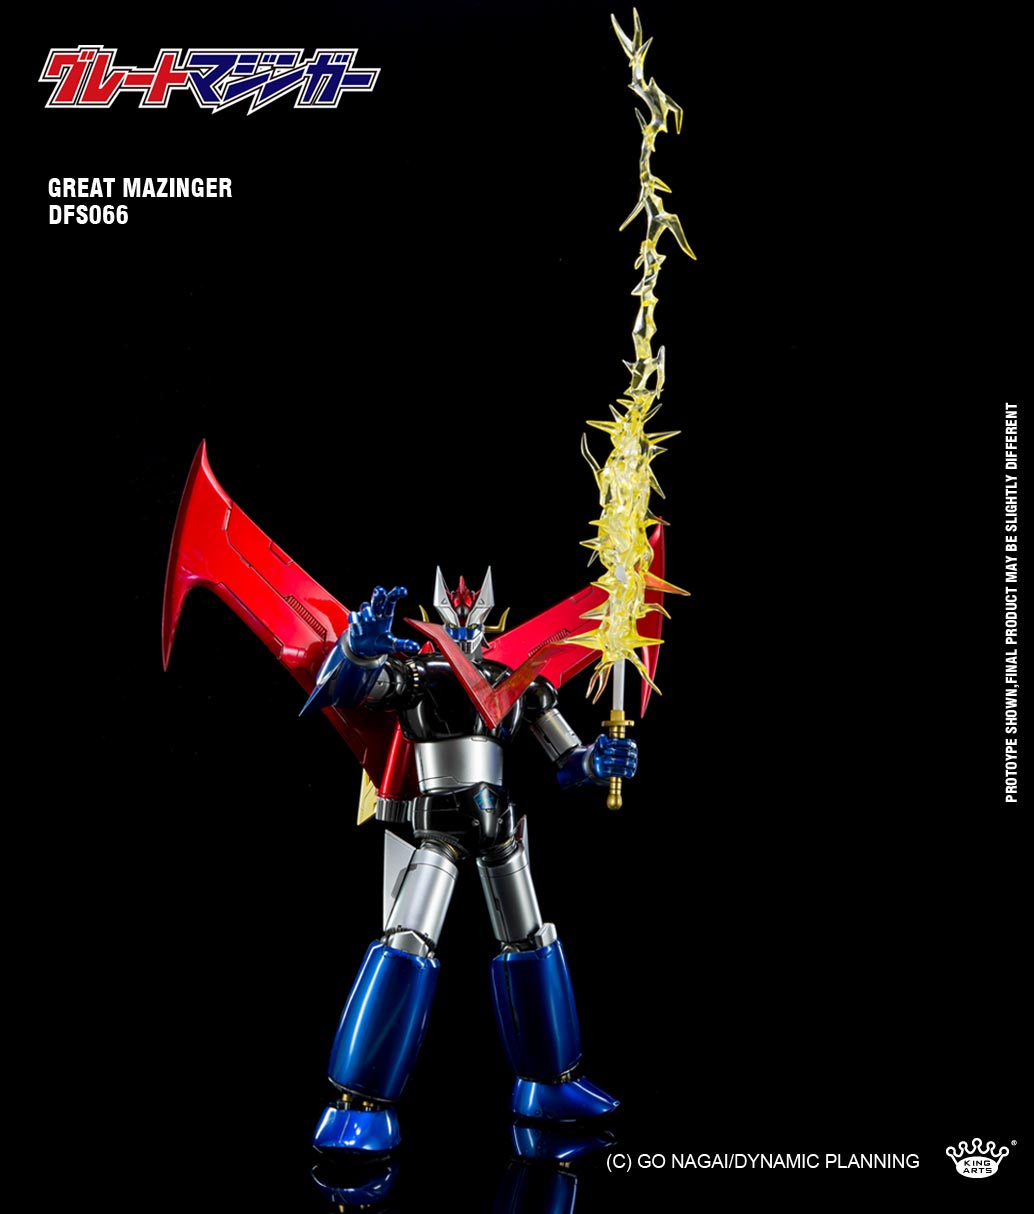 King Arts - DFS066 - Dynamic Planning - Diecast Action Great Mazinger